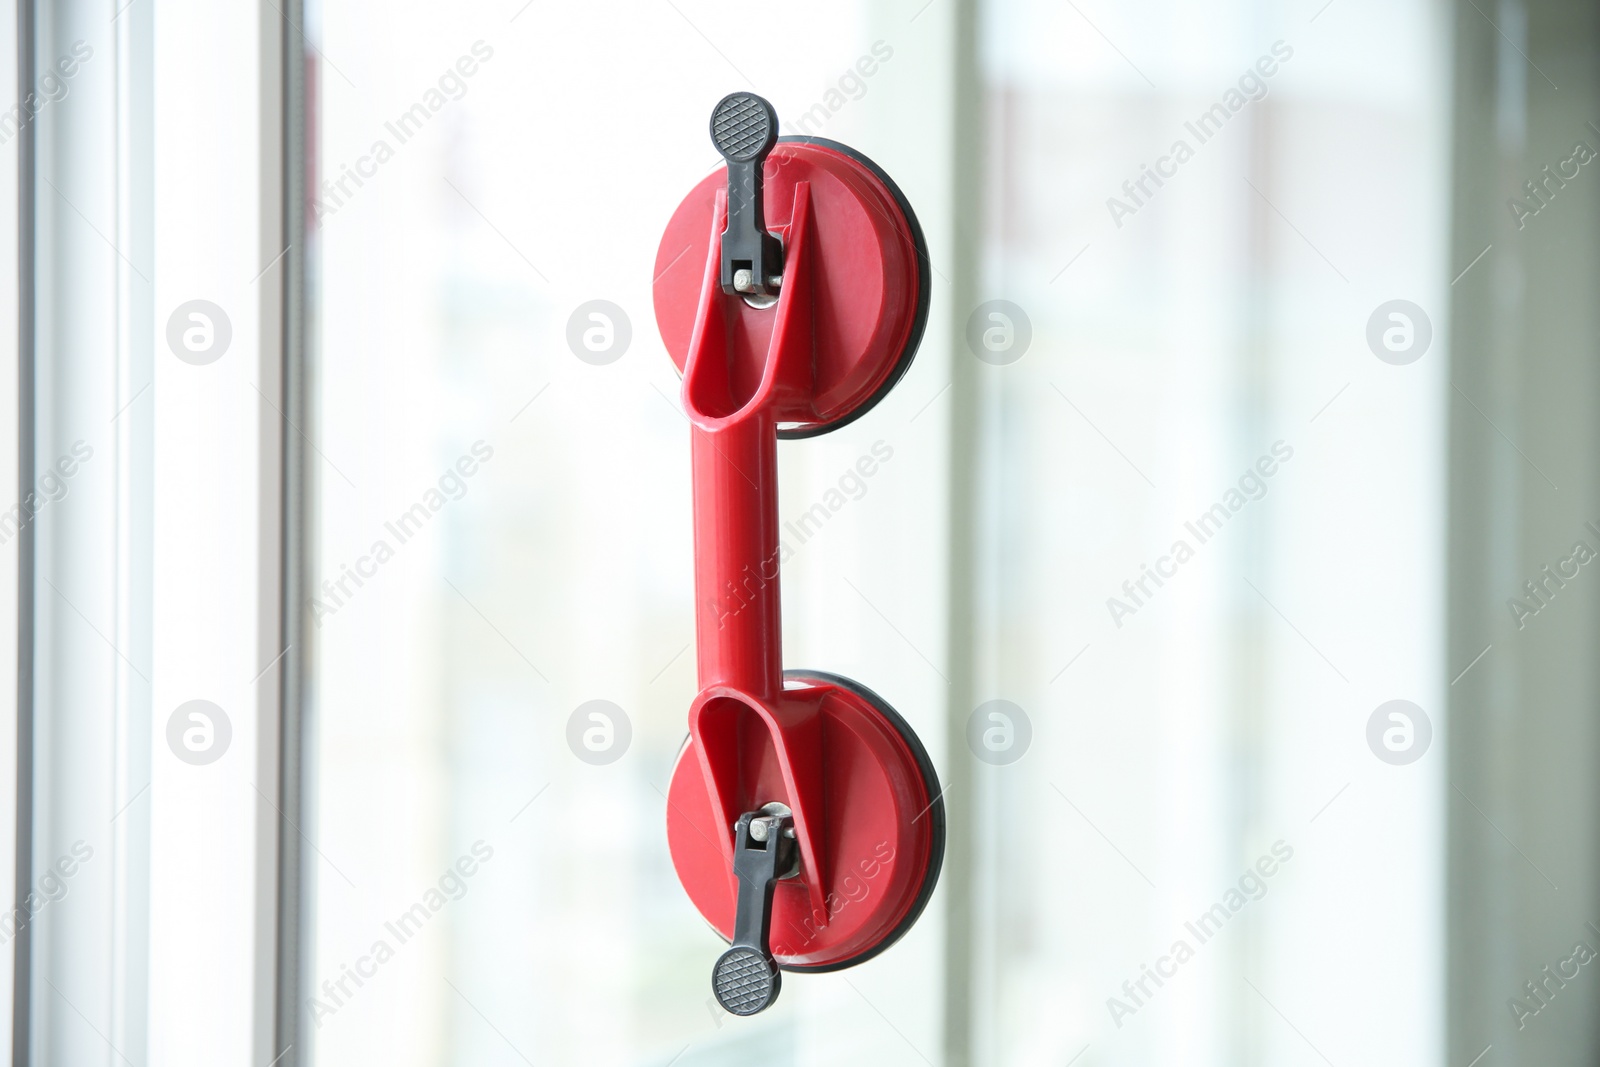 Photo of Suction lifter on glass against blurred background. Window installation